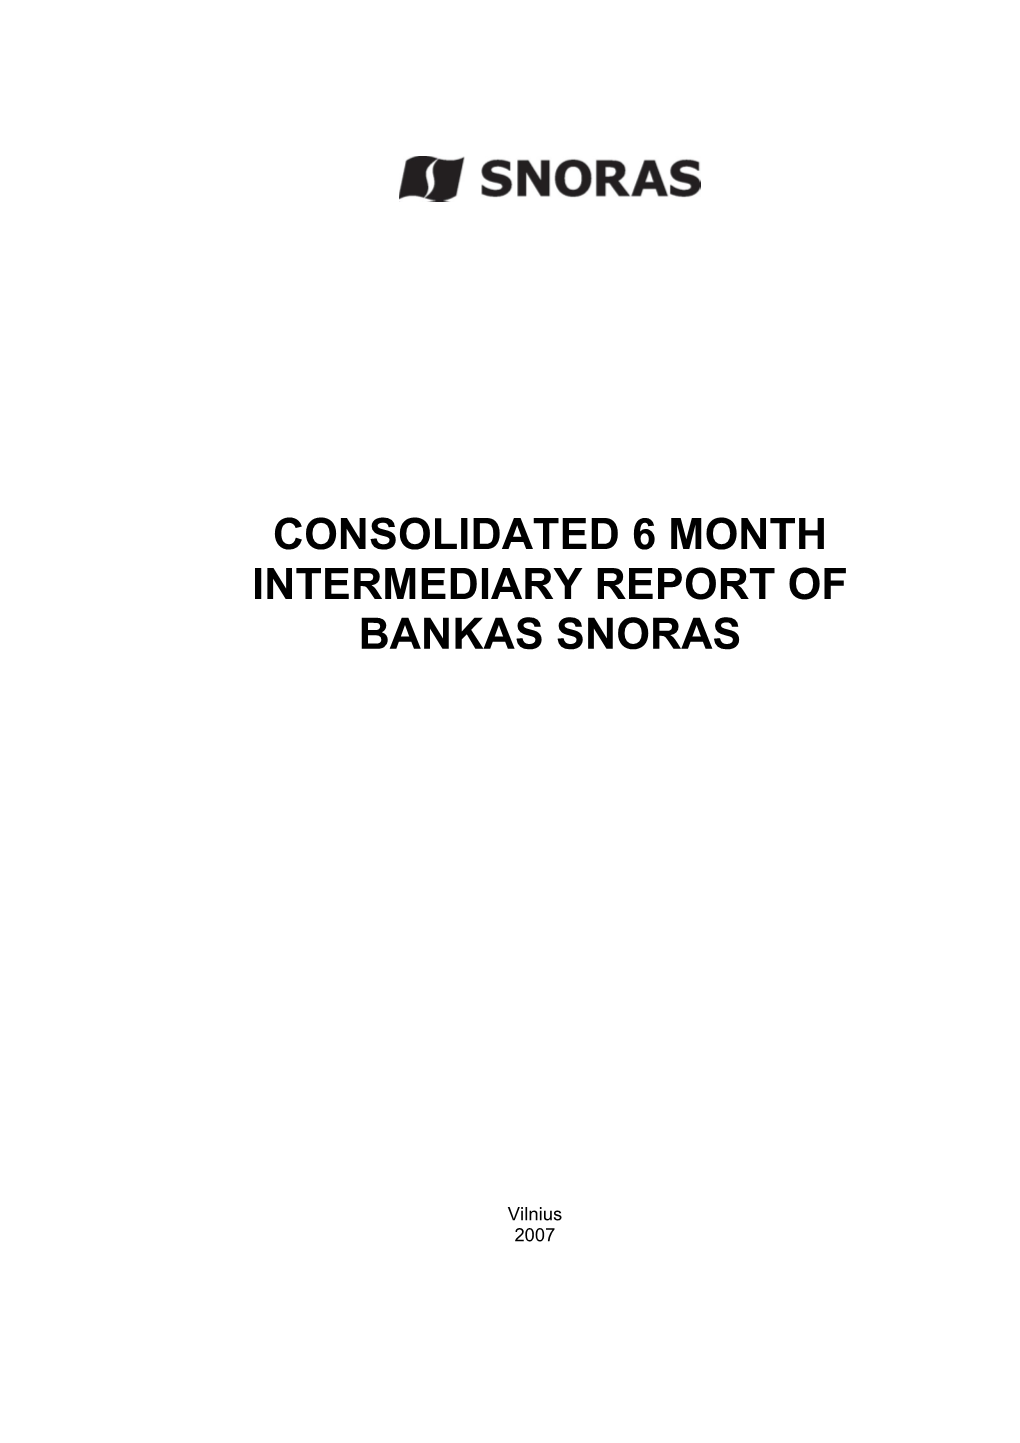 CONSOLIDATED 6 MONTH INTERMEDIARY REPORT of BANKAS SNORAS � � � � � � � � � � � � � � � � � � � � � � � � � Vilnius� 2007 � � � 1